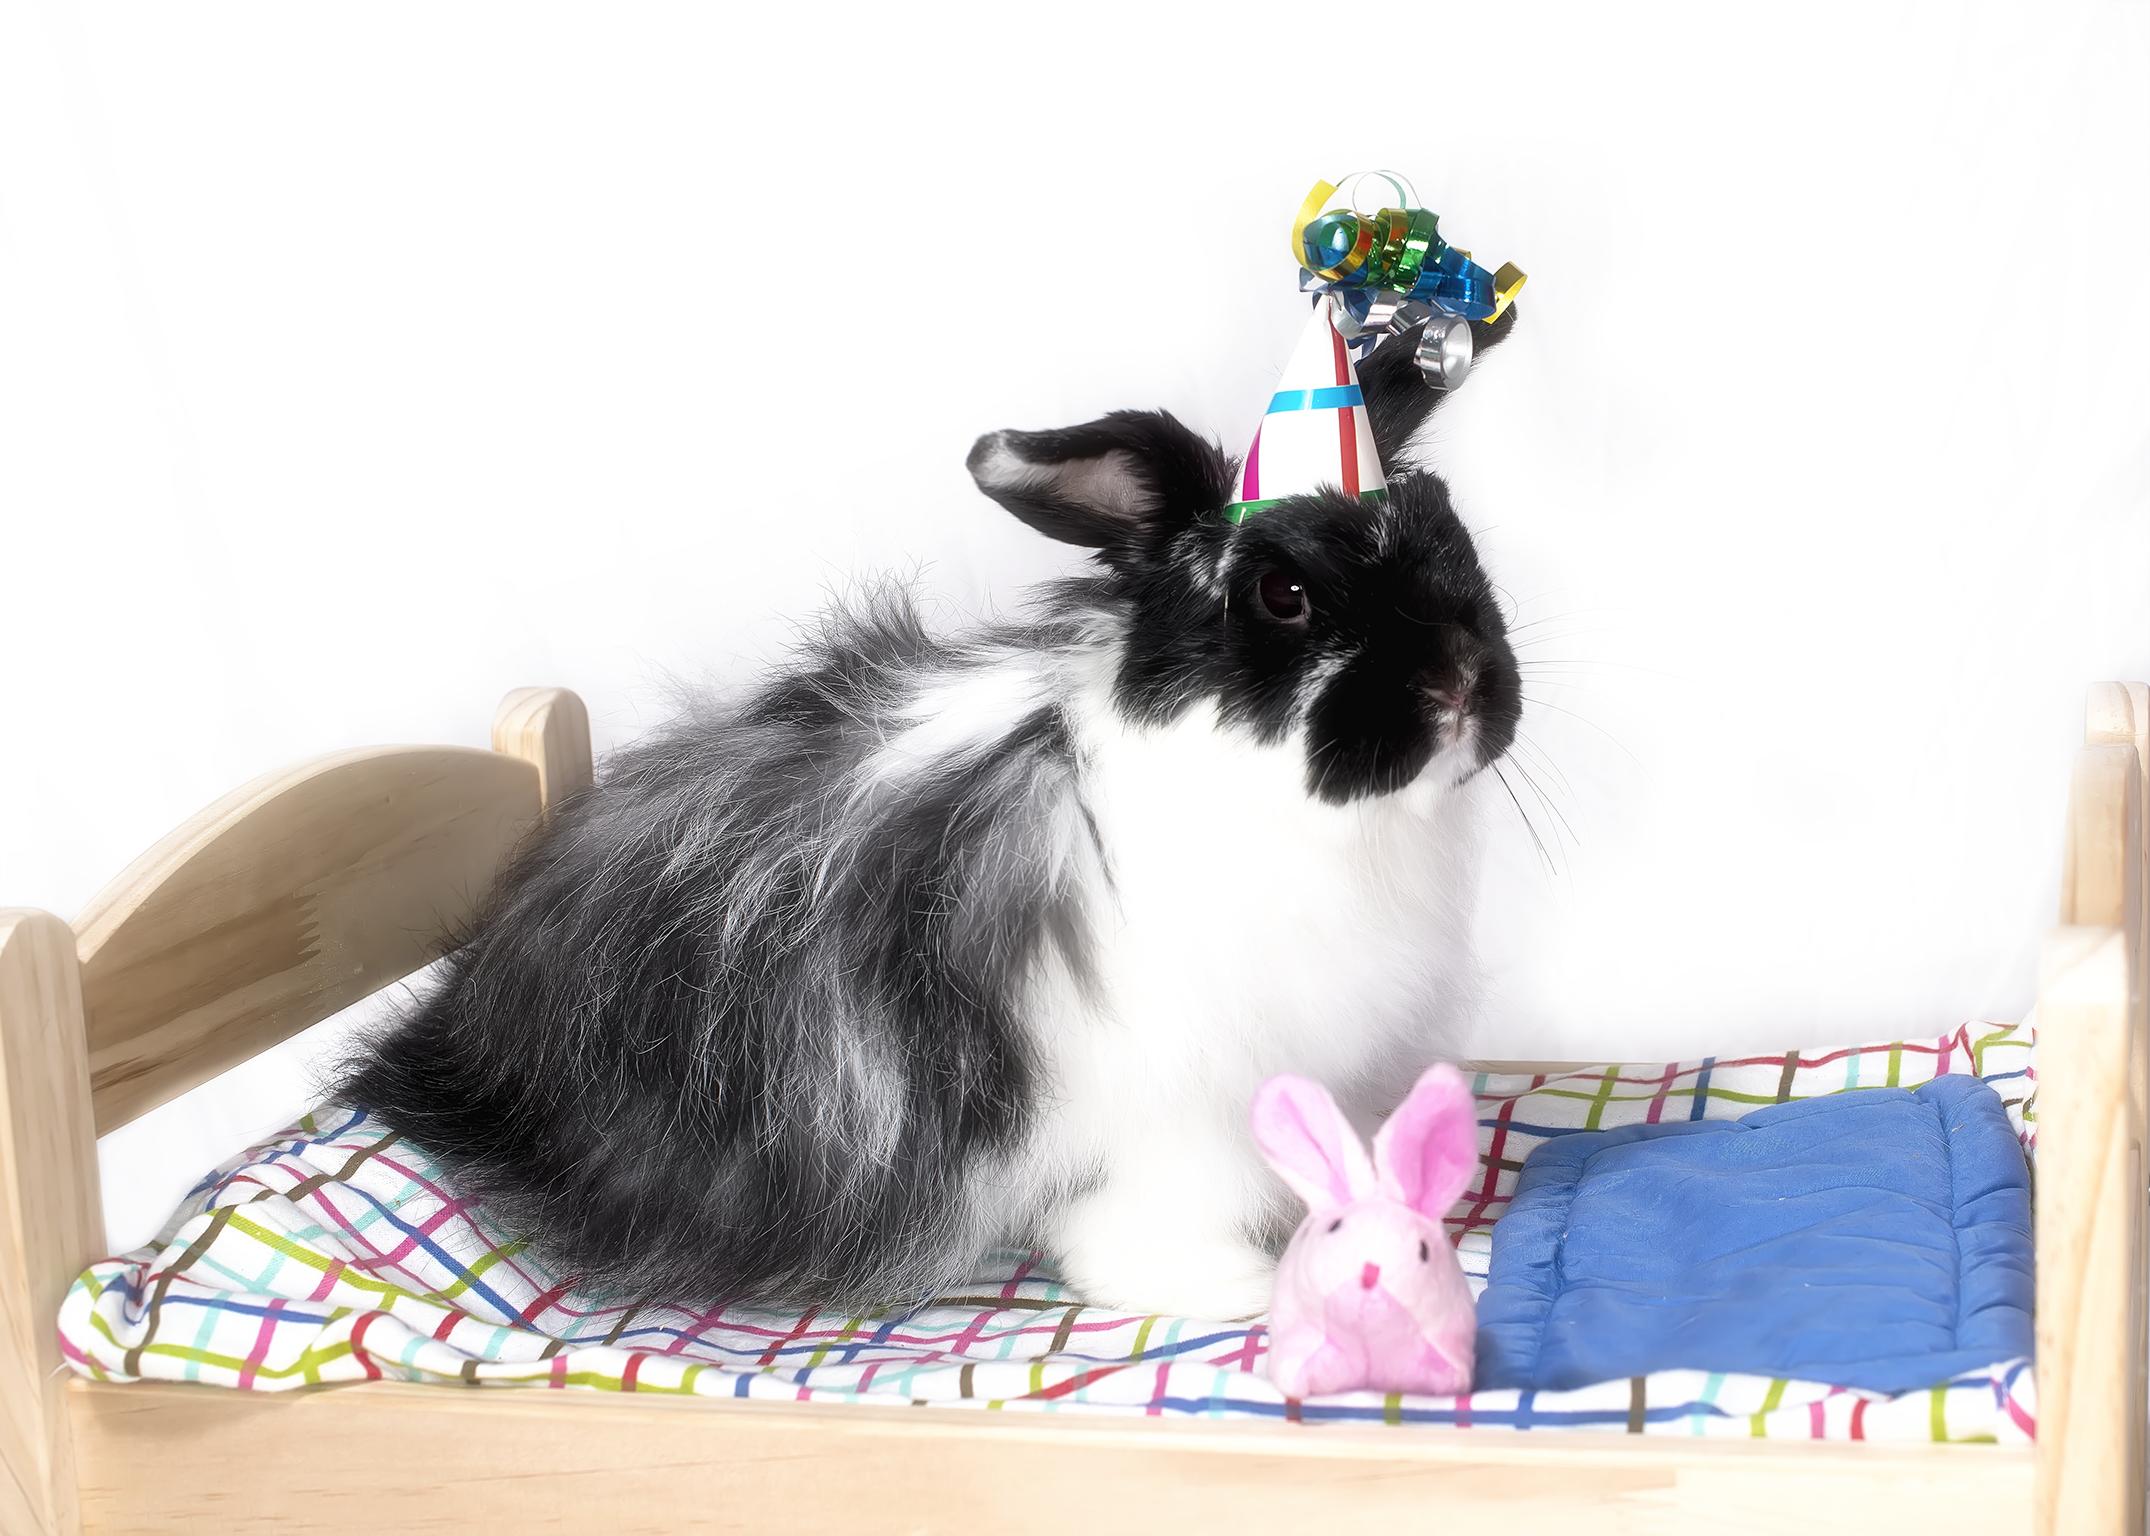 Bunny Poses for Her Birthday Portrait on Her Bed with Her Stuffed Bunny